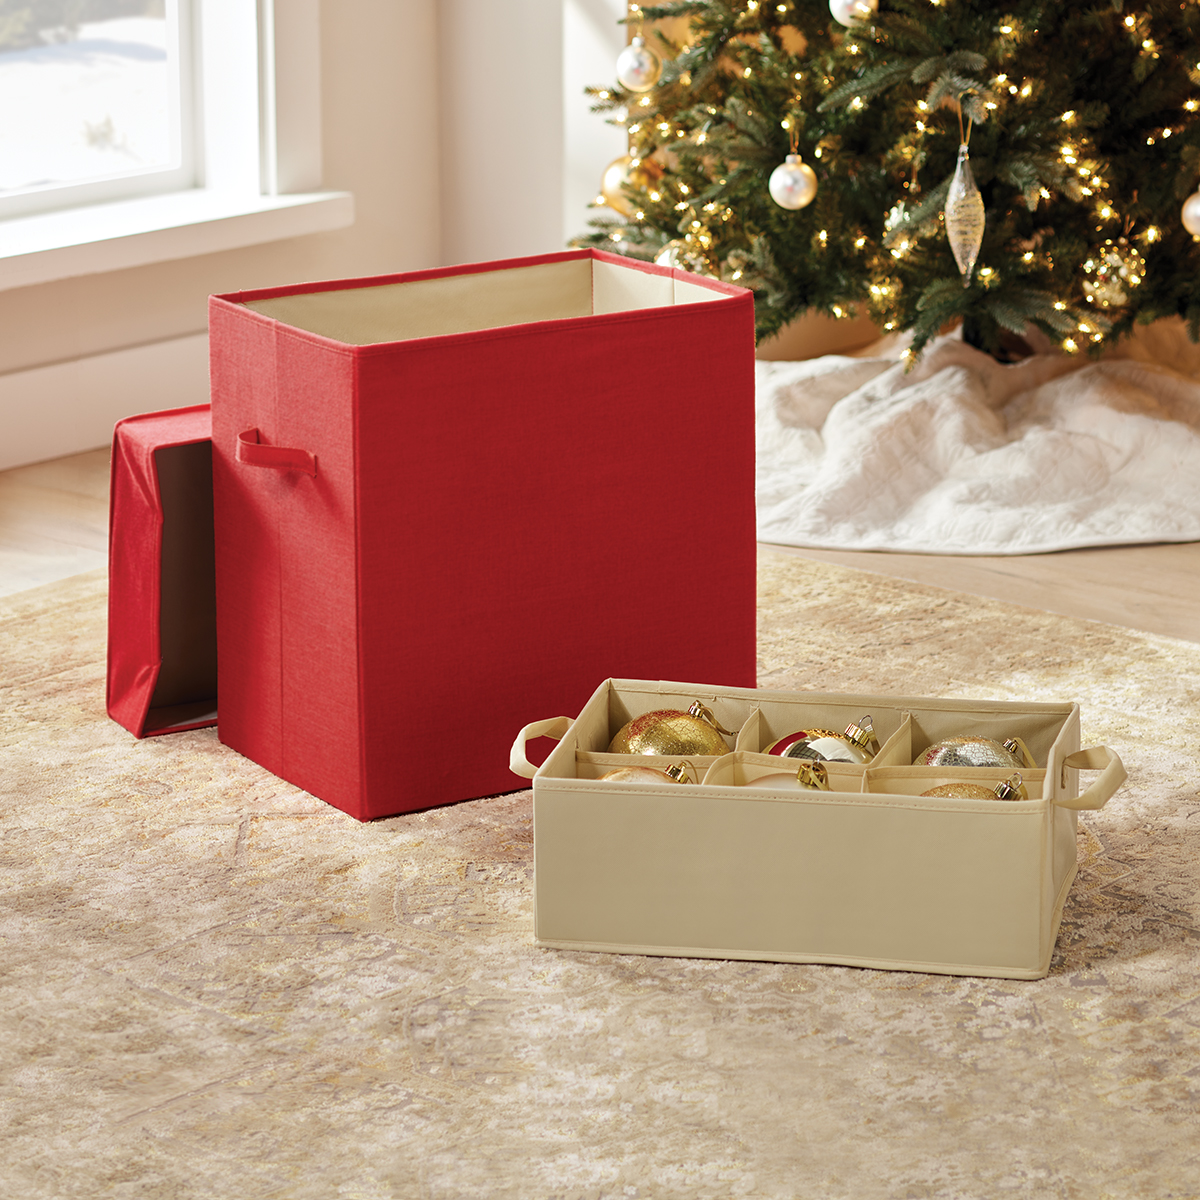 Ornament Storage Boxes | The Container Store